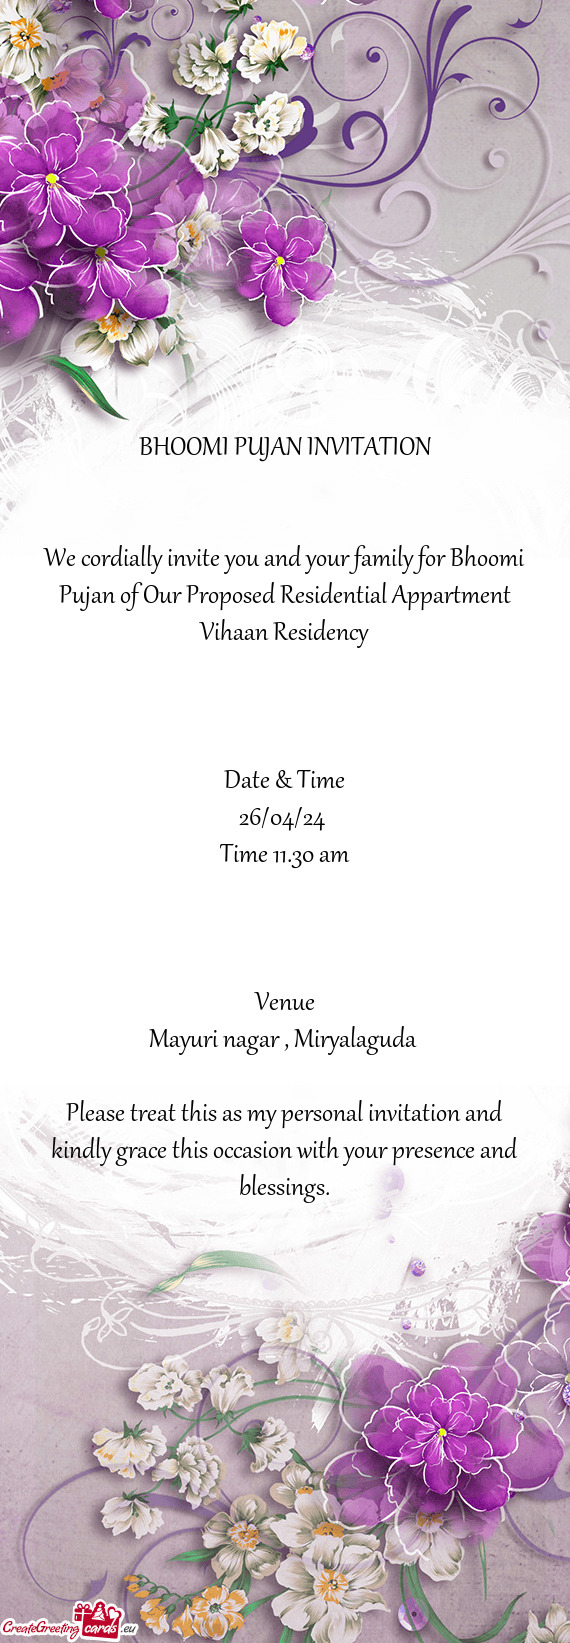 We cordially invite you and your family for Bhoomi Pujan of Our Proposed Residential Appartment Viha